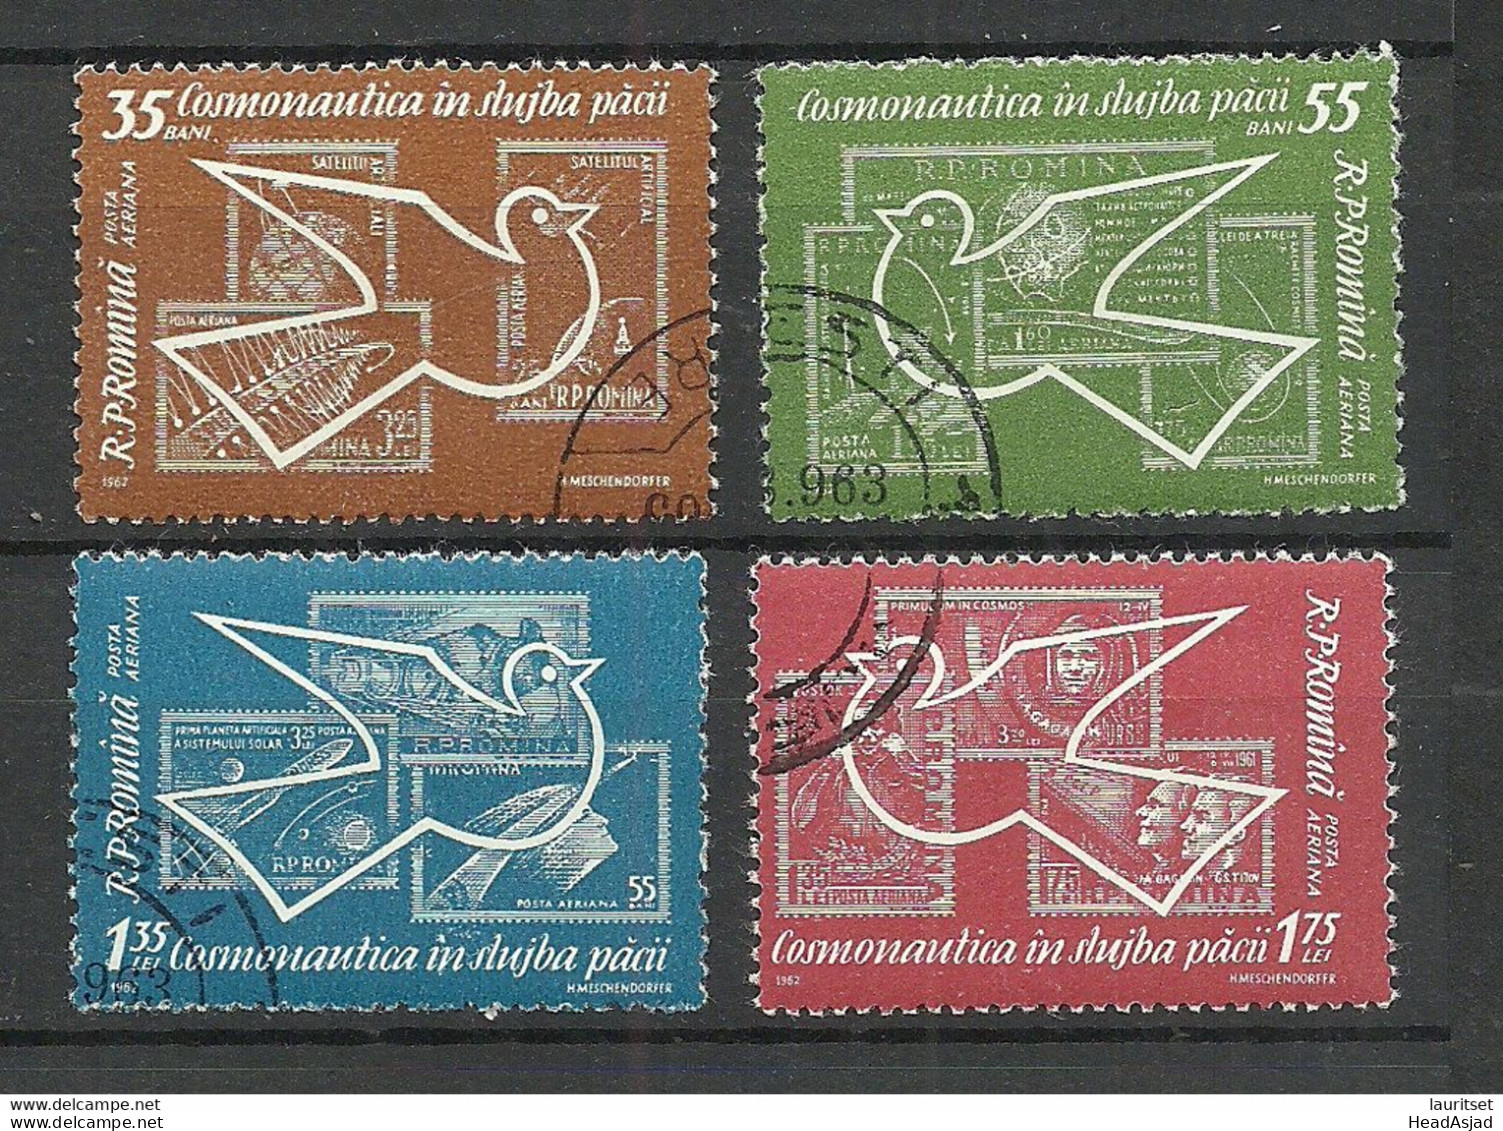 Romania 1962 Michel 2086 - 2089 Kosmonautik Space Weltraumforschung Stamps On Stamp - Timbres Sur Timbres